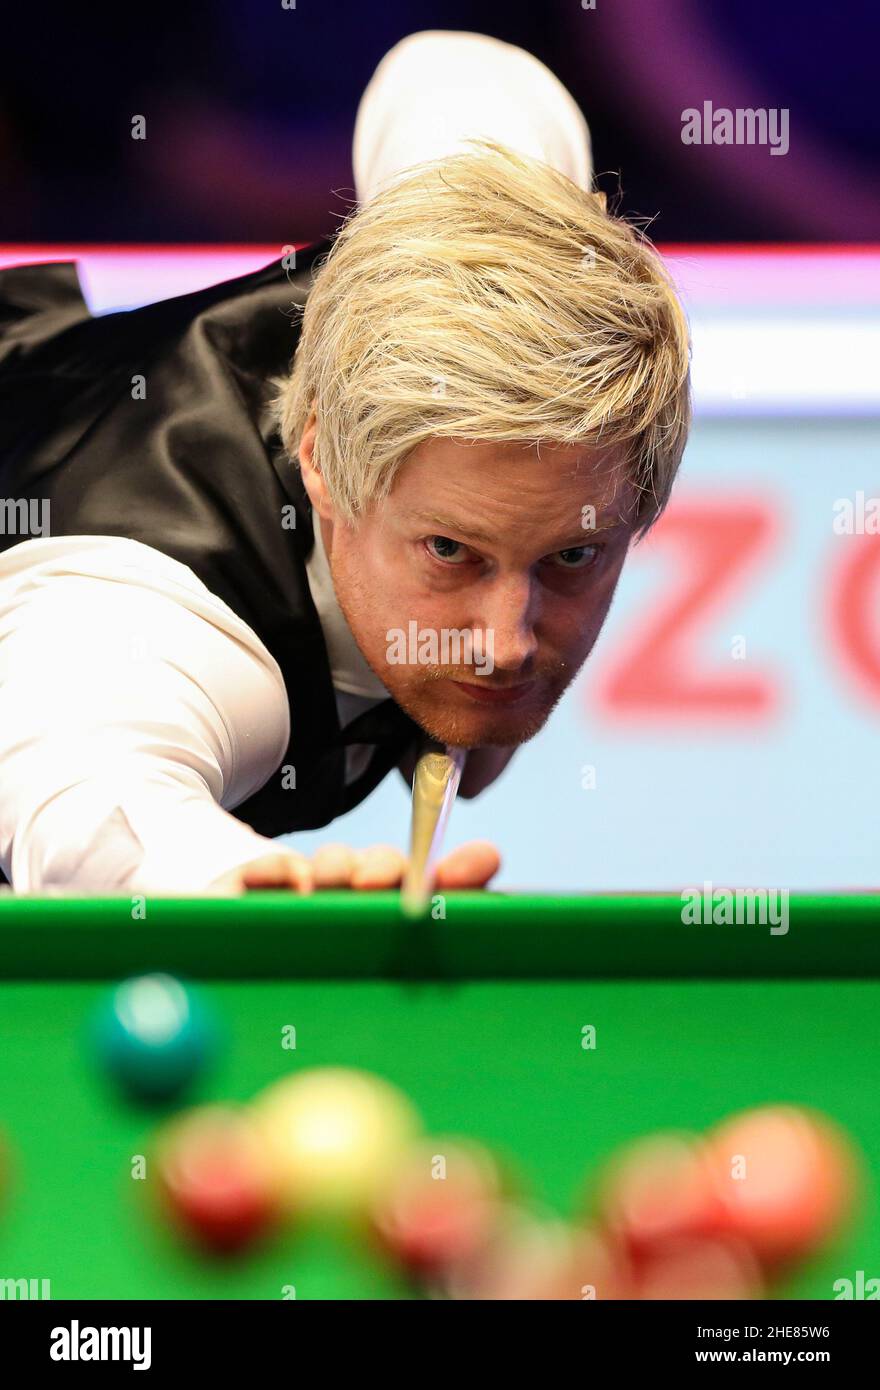 Neil Robertson plays a shot during day one of the 2022 Cazoo Masters at Alexandra Palace, London. Picture Date Sunday January 9, 2022